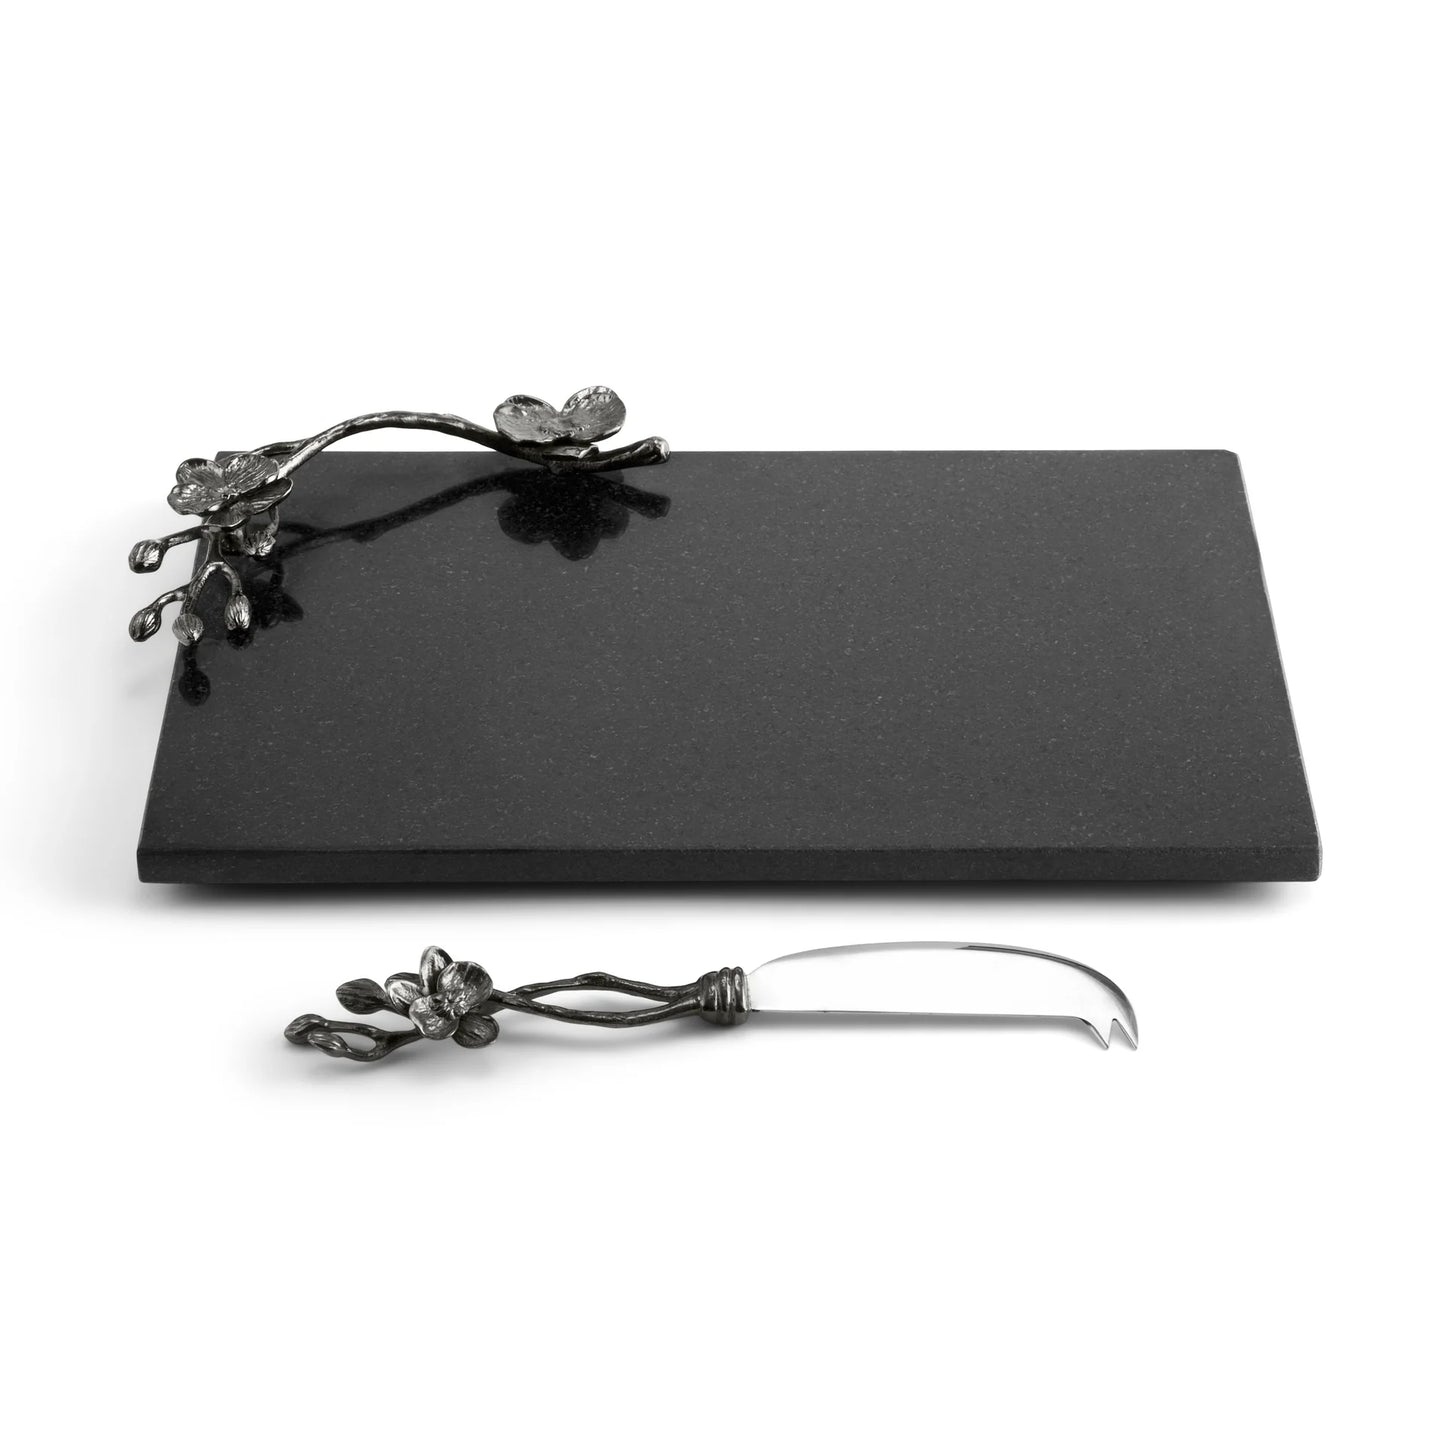 Black Orchid Cheese Board w/ Knife - Small